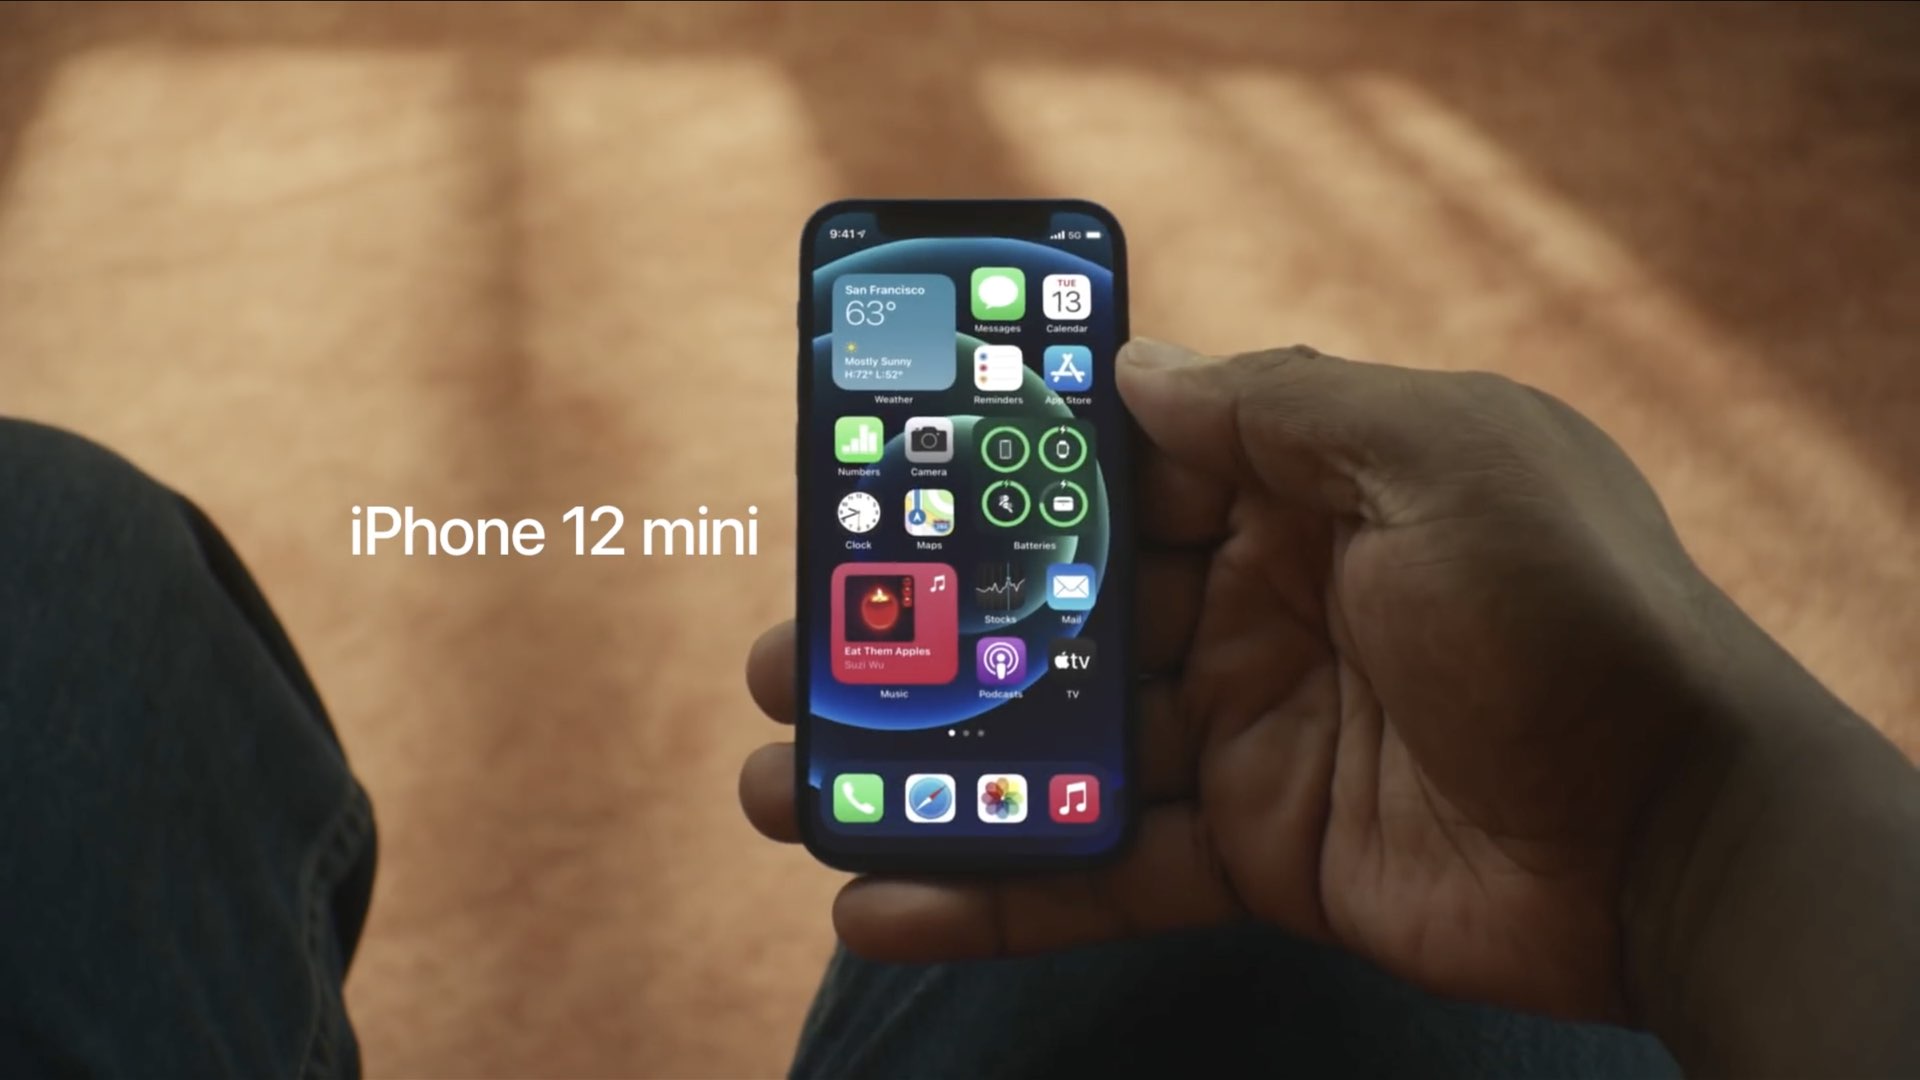 A still from an Apple ad showing an iPhone 12 mini in a user's hands